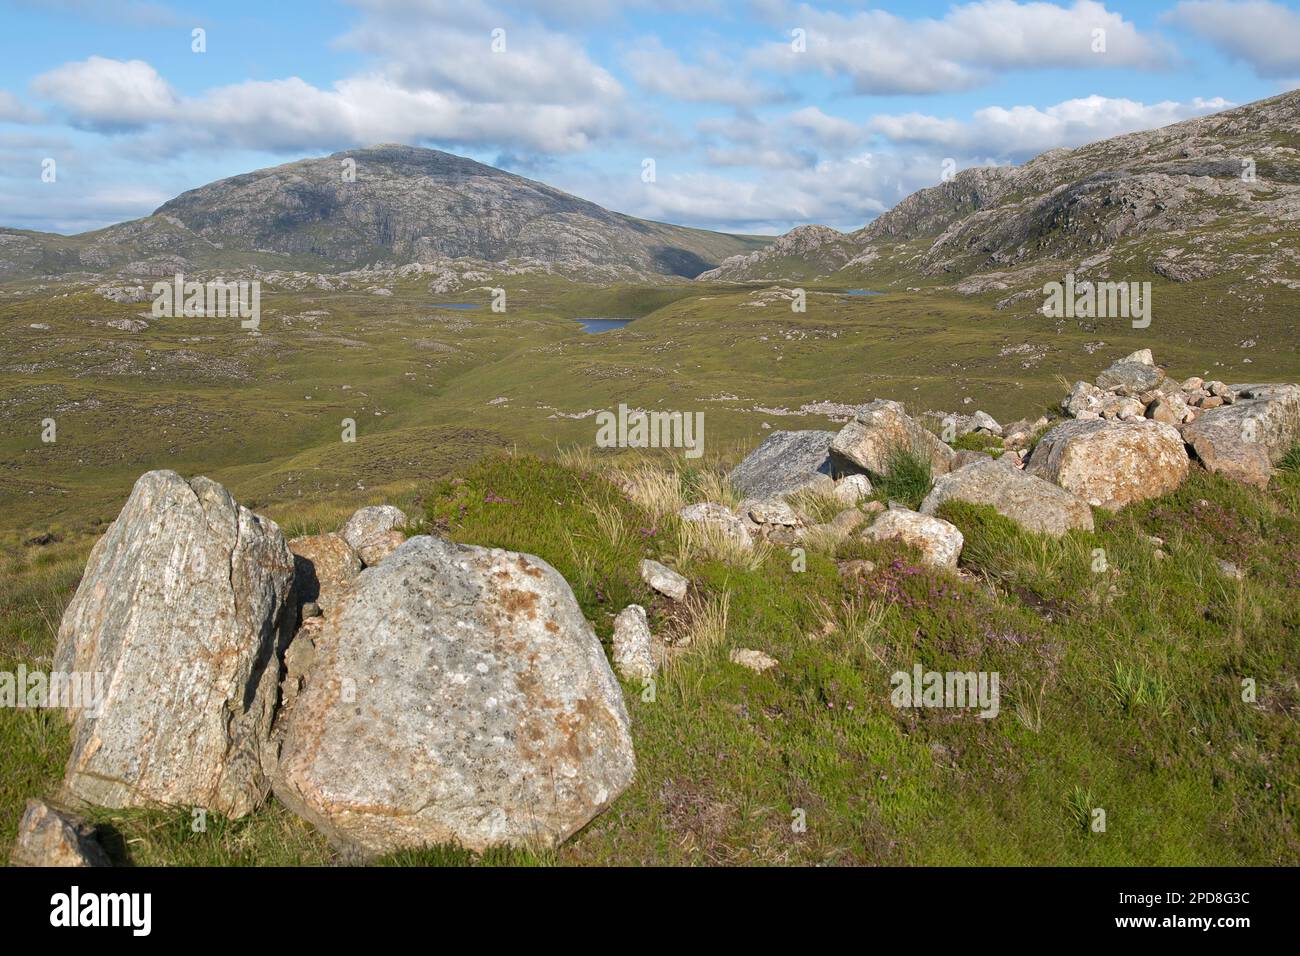 Bog, Rocks and Stones in the Highlands of Lewis, Isle of Lewis, Hebrides, Outer Hebrides, Western Isles, Scotland, United Kingdom, Great Britain Stock Photo